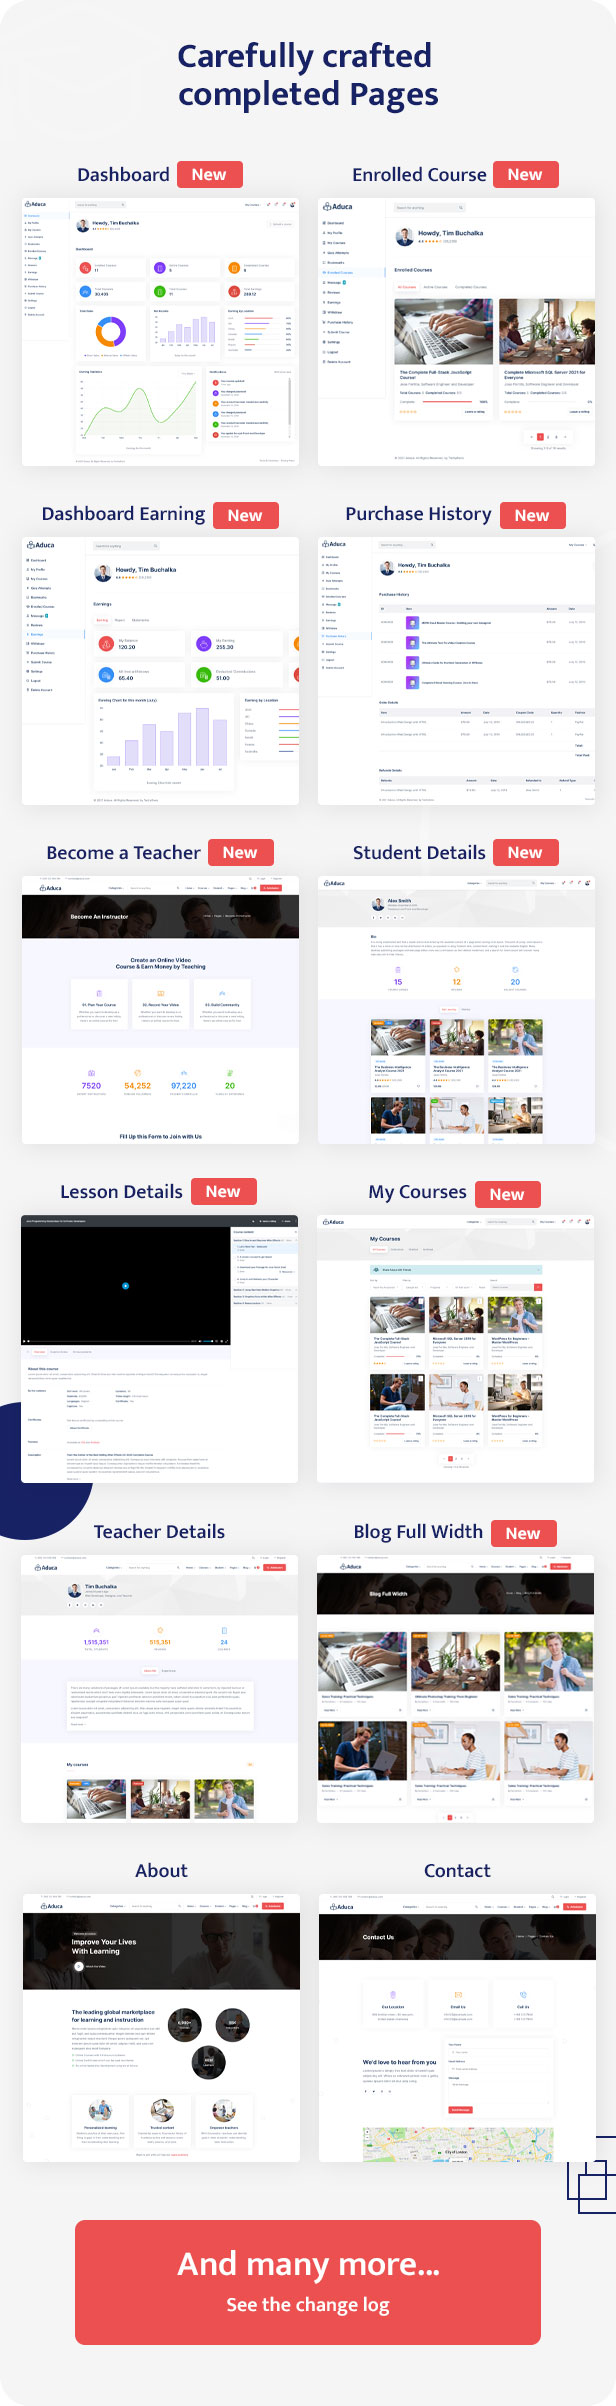 Aduca - Online Education & LMS HTML5 Template